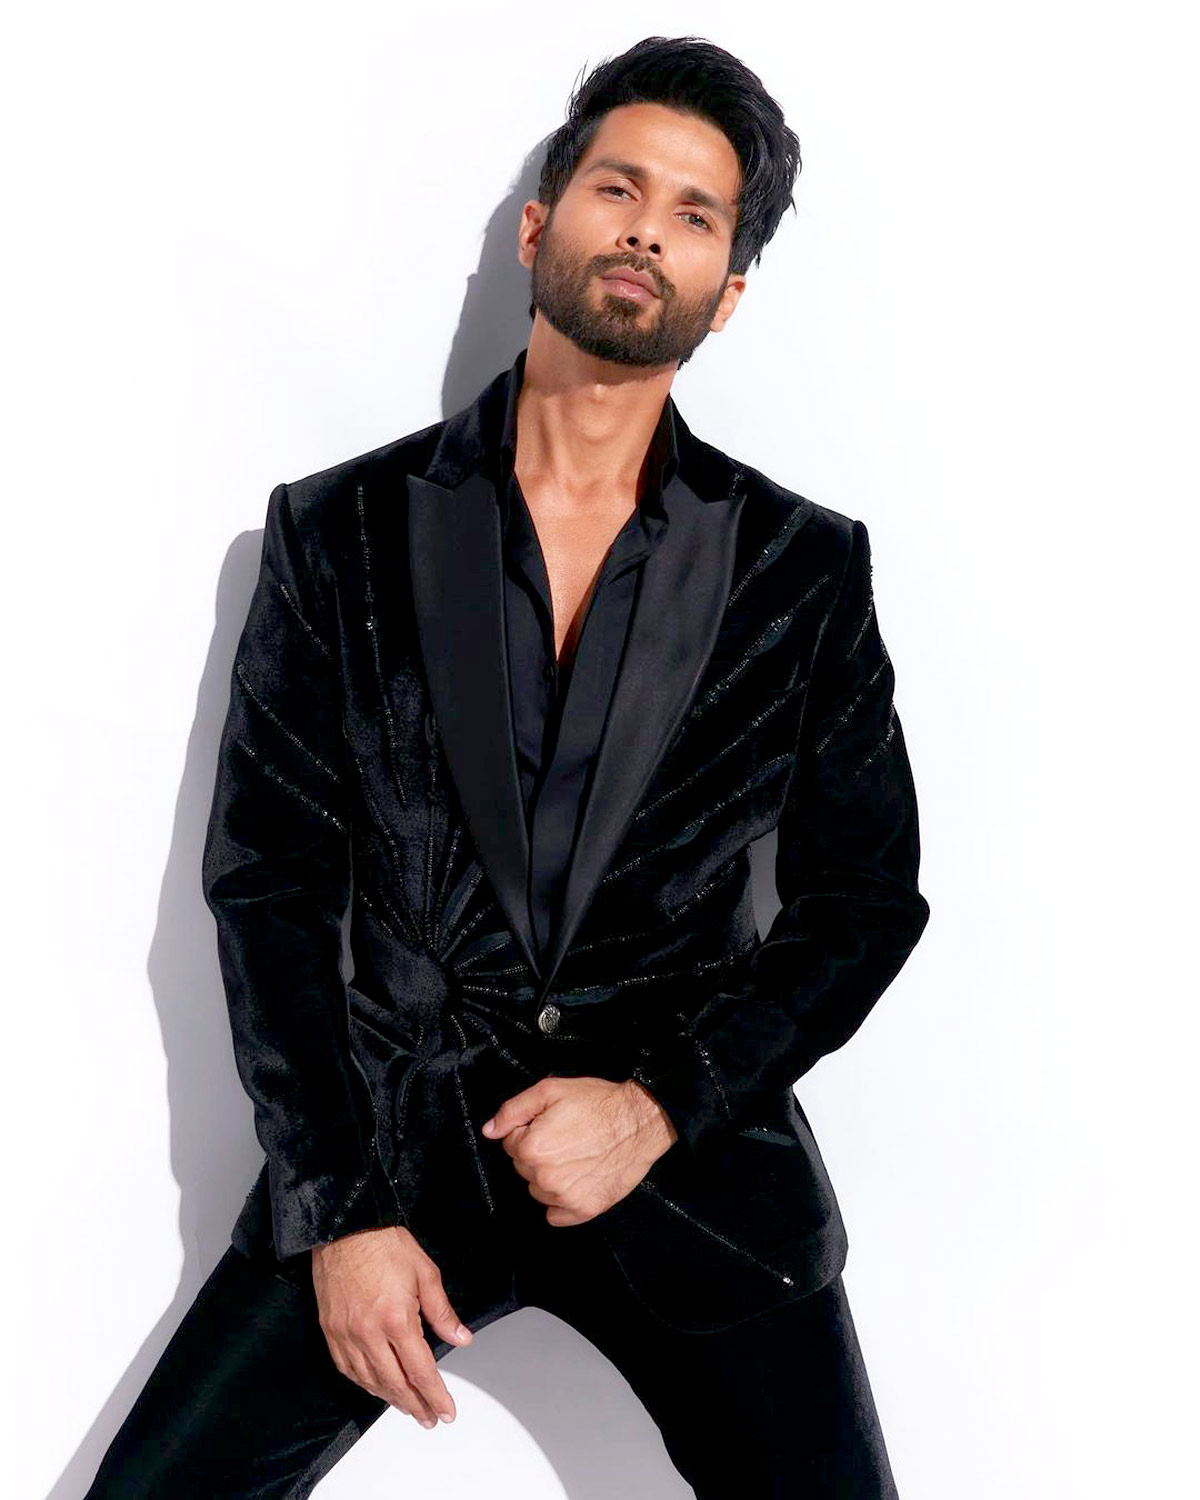 What Shahid Is ‘Very Excited’ About